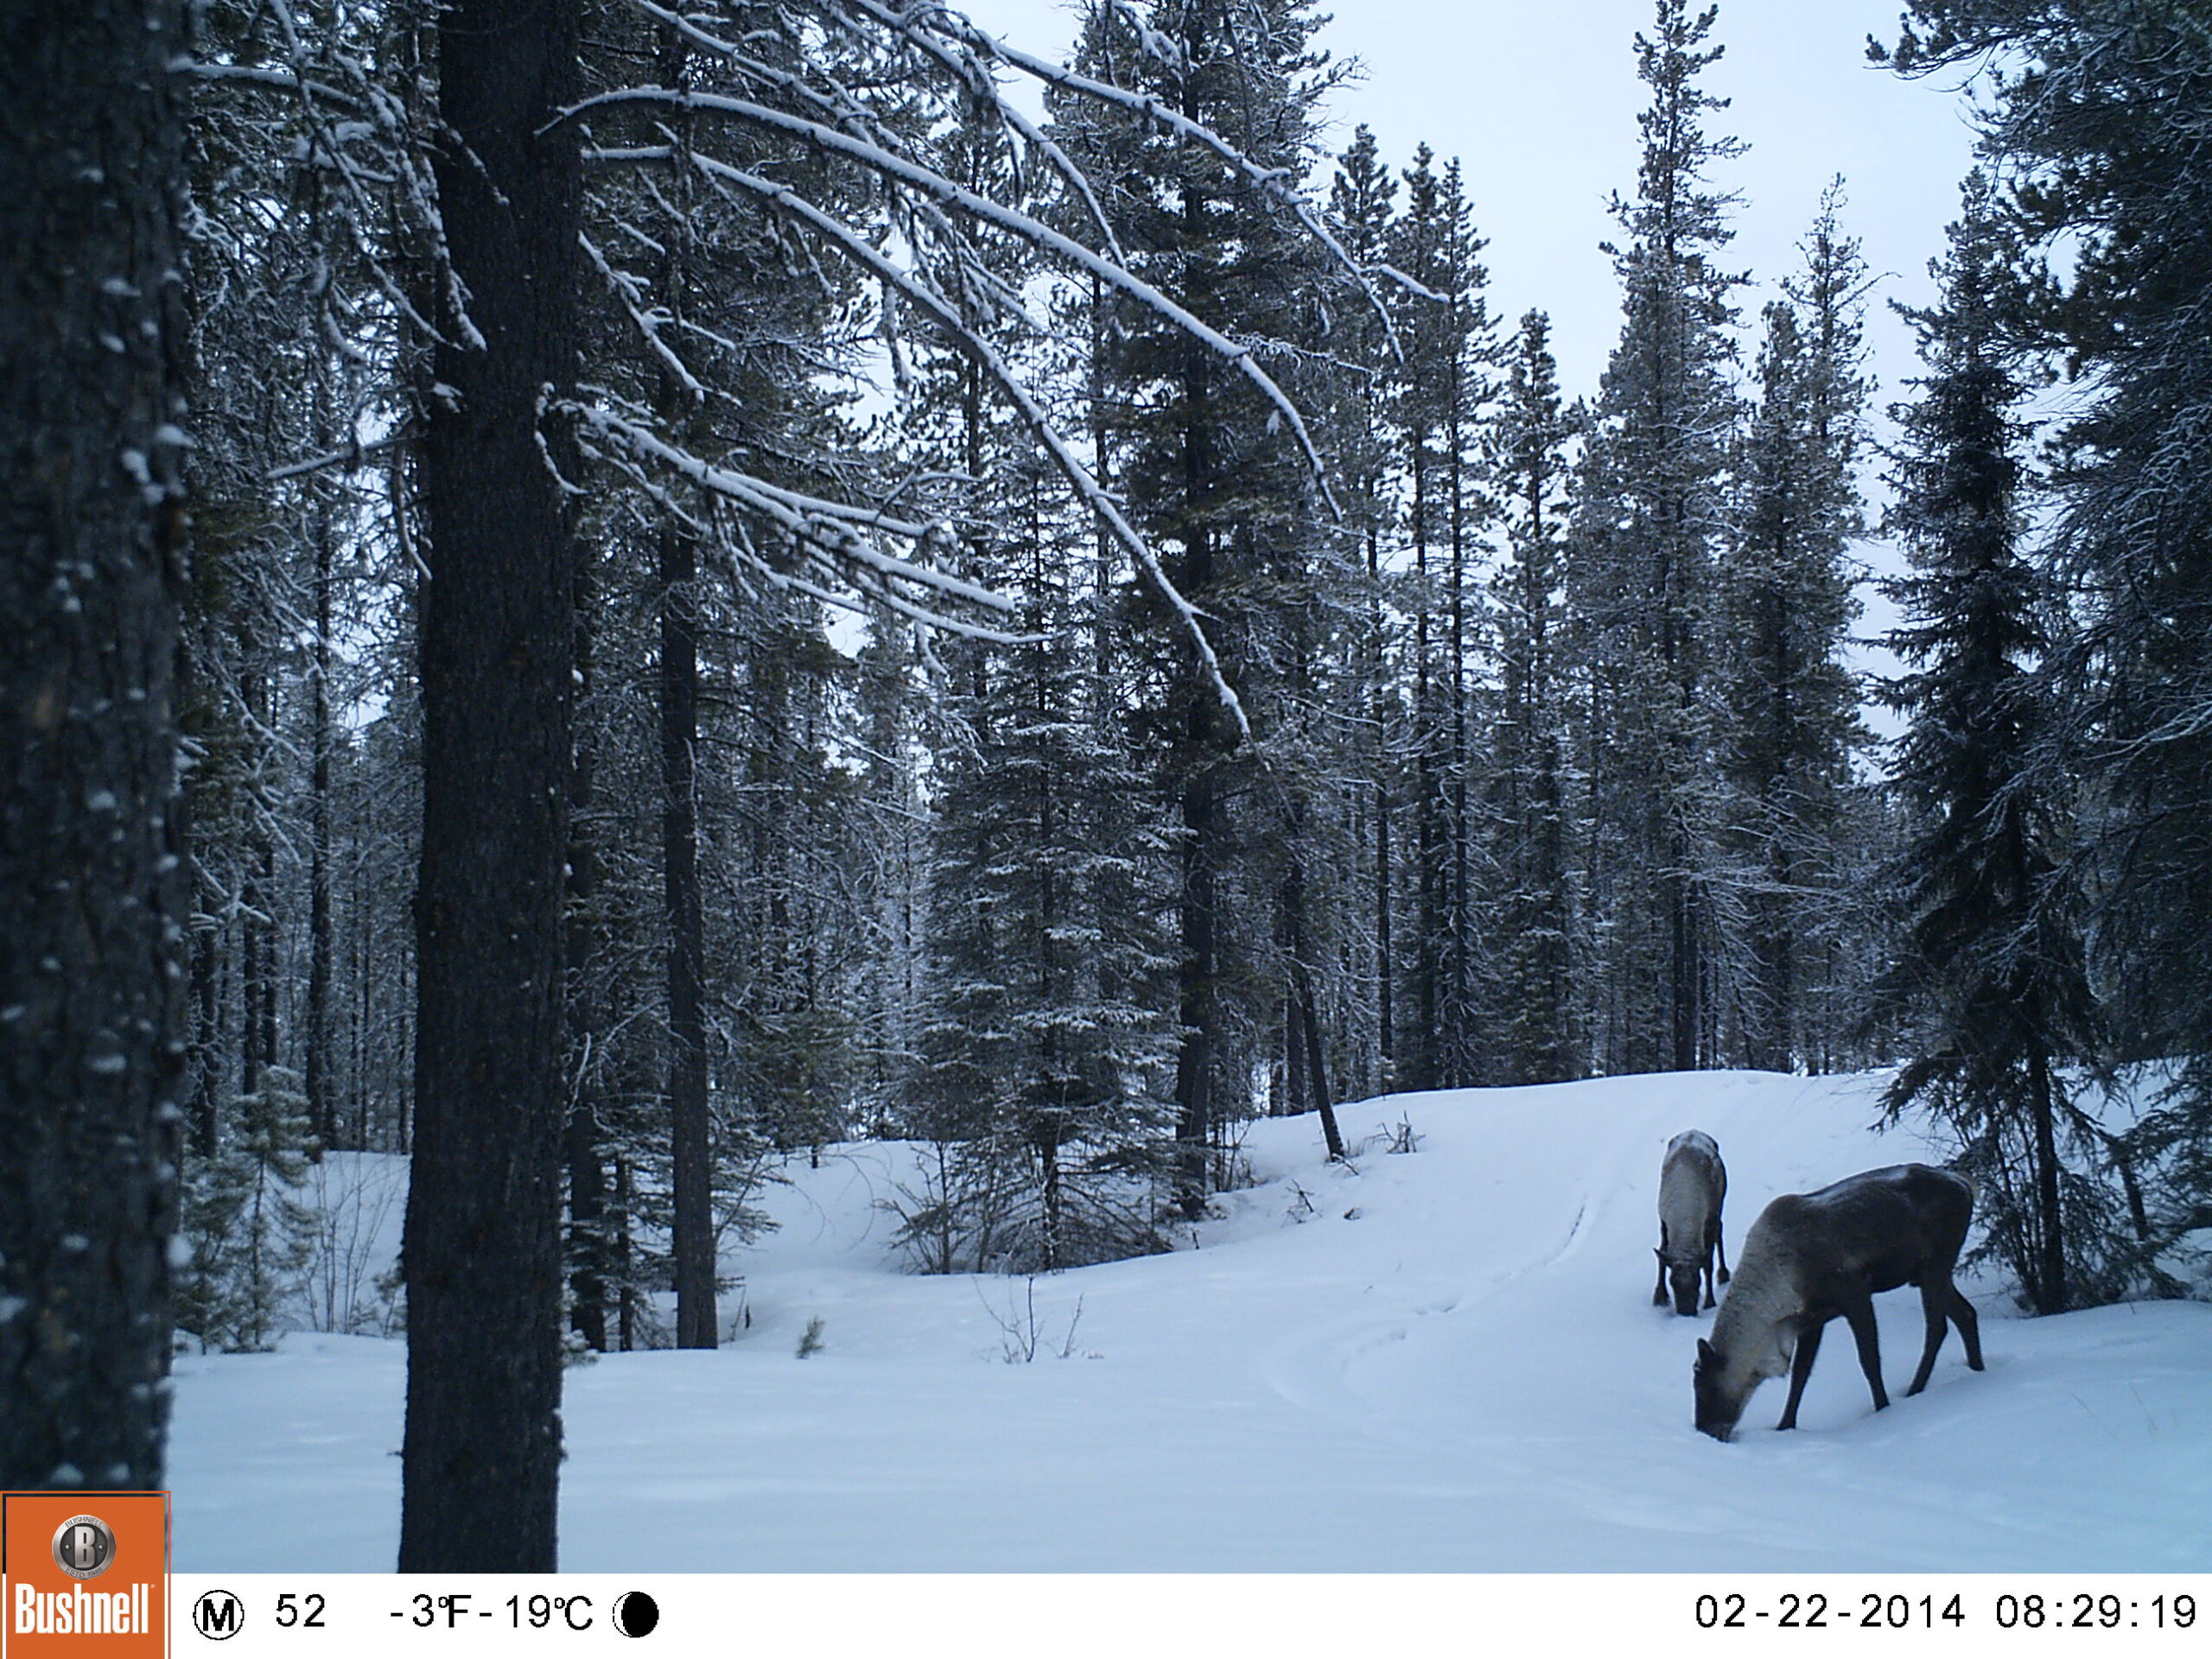 Trailcamera photo of a caribou in a snowy forest